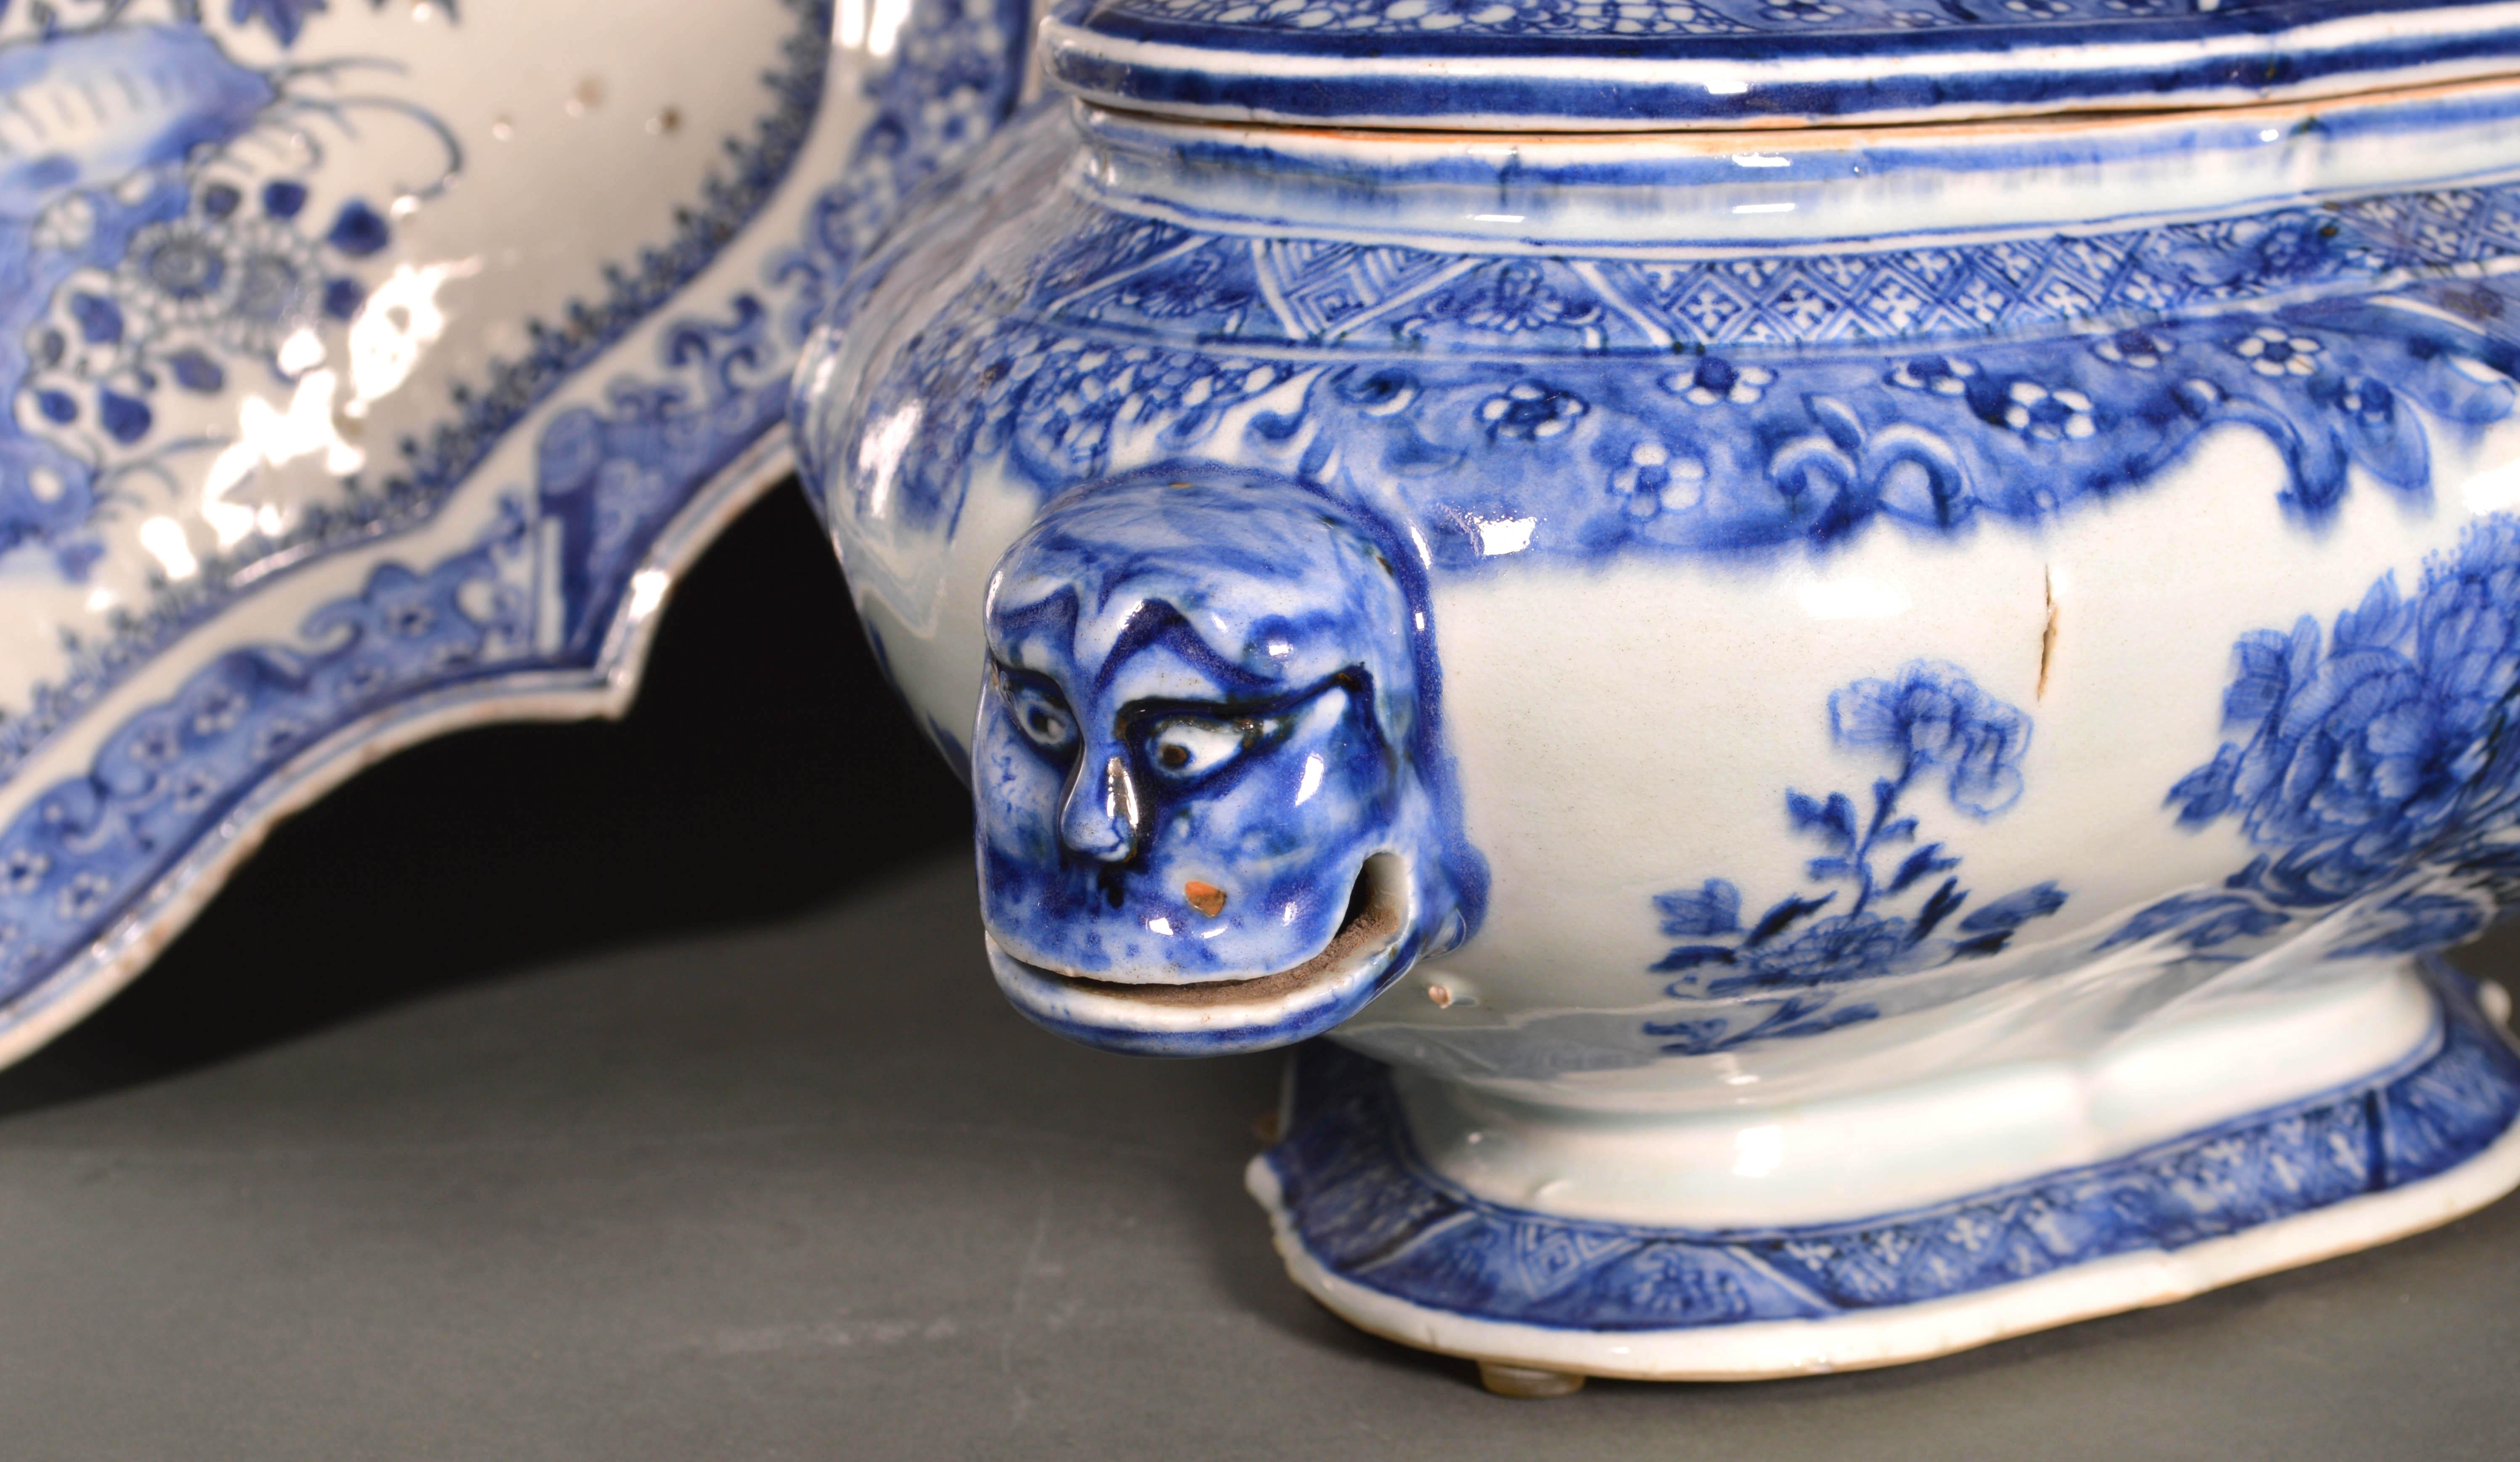 Chinese Export porcelain early blue and white soup tureen, cover and stand,
circa 1740-1750 
   
The rare Chinese Export porcelain tureen is of a quatrefoil bombé shape and is painted on both sides with an Oriental garden with plants and flowers